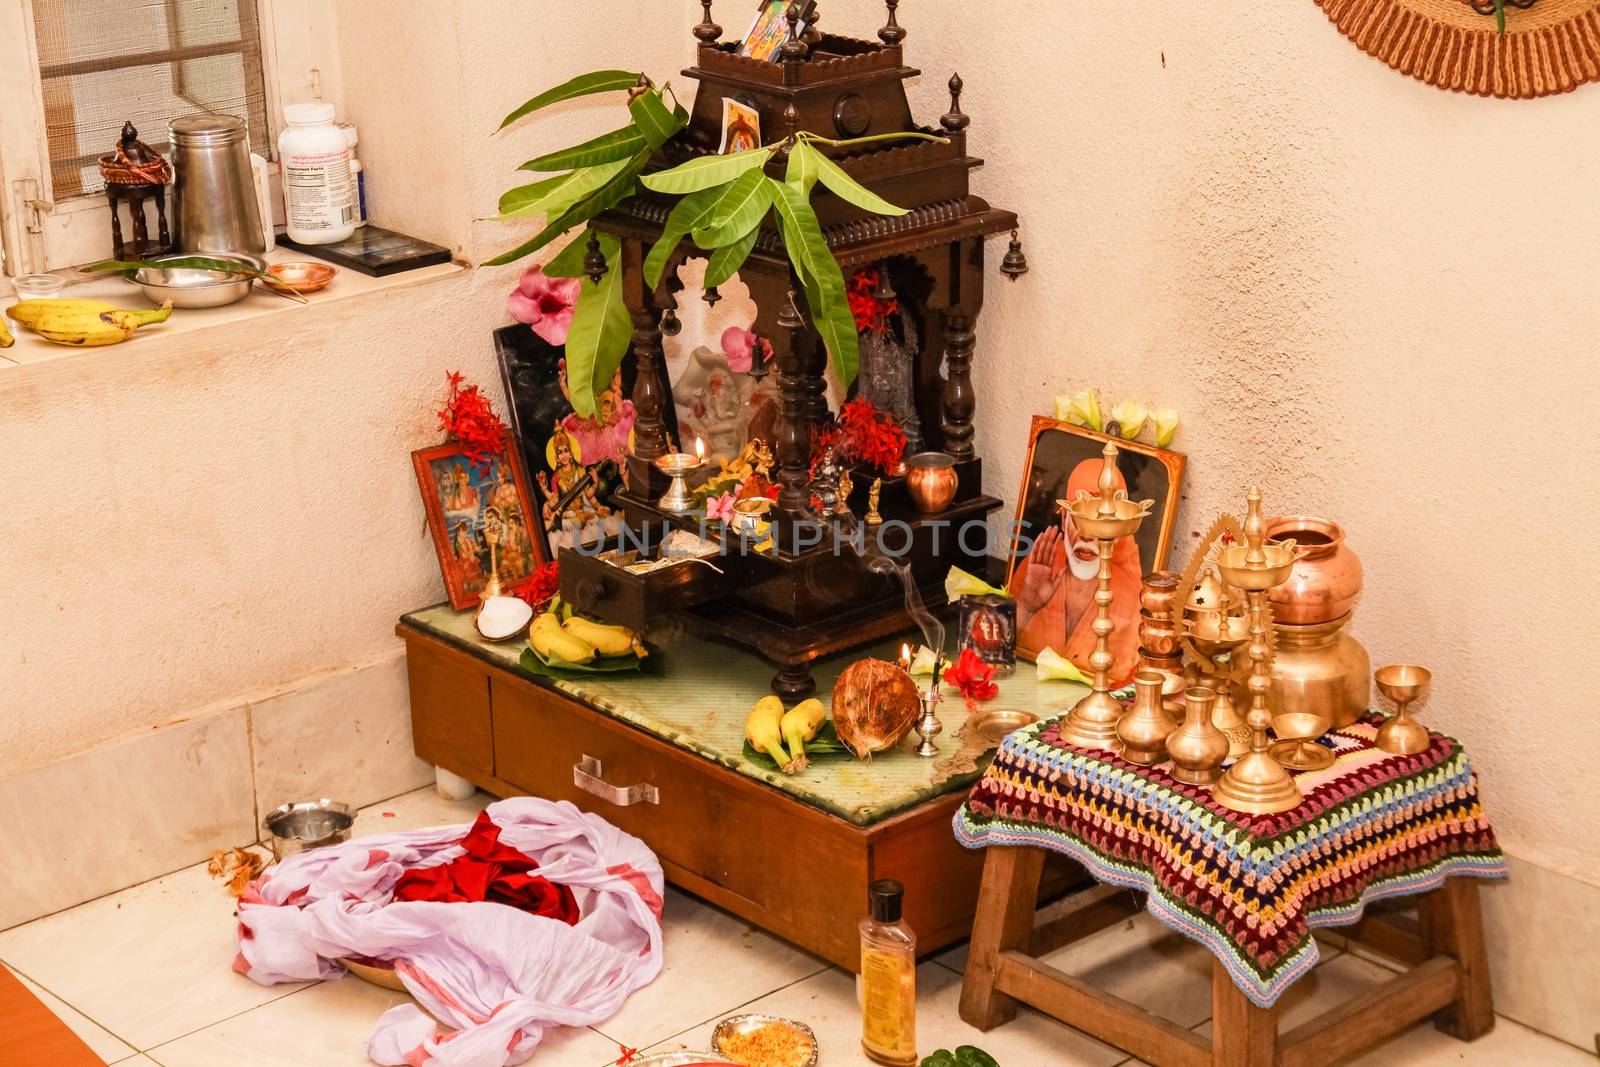 This is how a typical 'Puja Room' in any Hindu South Indian Family Home looks like after a traditional puja or prayer ceremony has been completed. There are always multiple icons , statues or photos of various sundry Gods and other paraphernalia used in the ceremony. the broken cocnut signifies completion of puja.